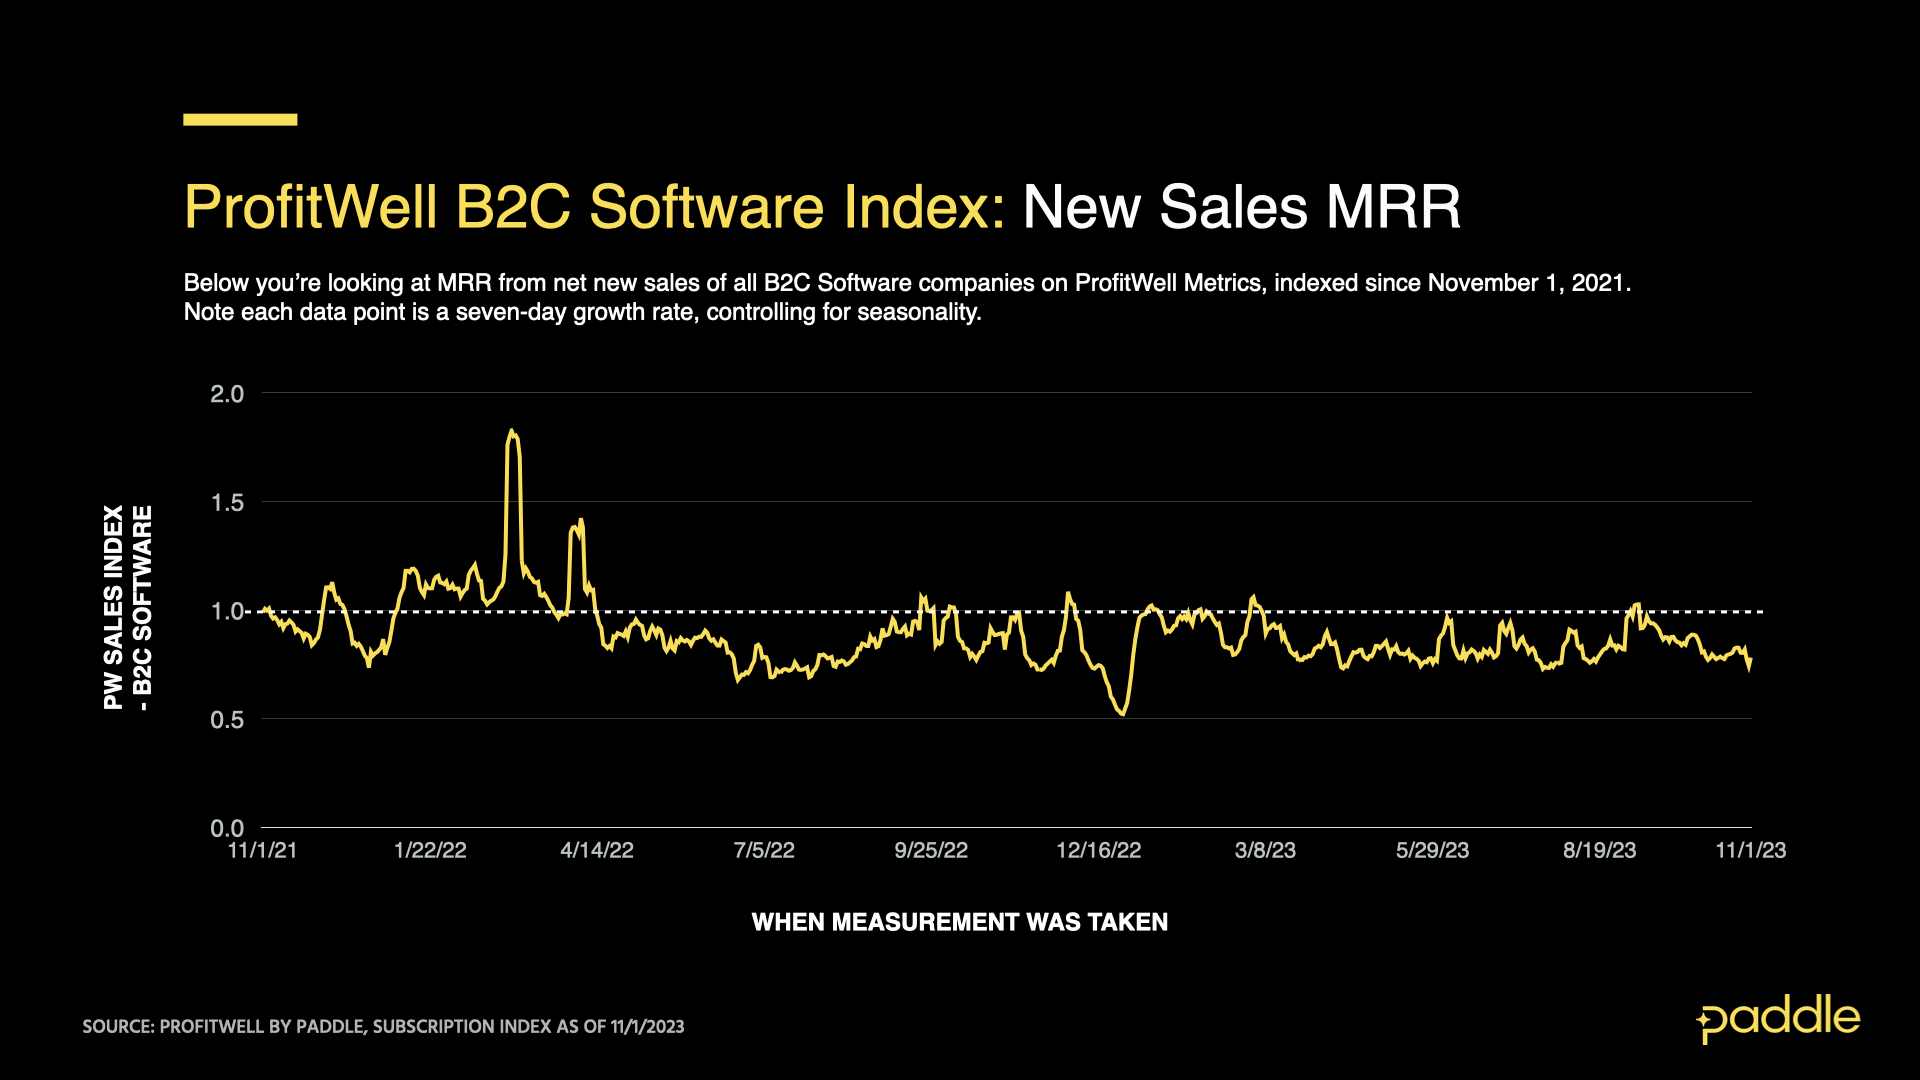 ProfitWell B2C Software Sales Index as of November 1, 2023 - MRR impact of net new sales